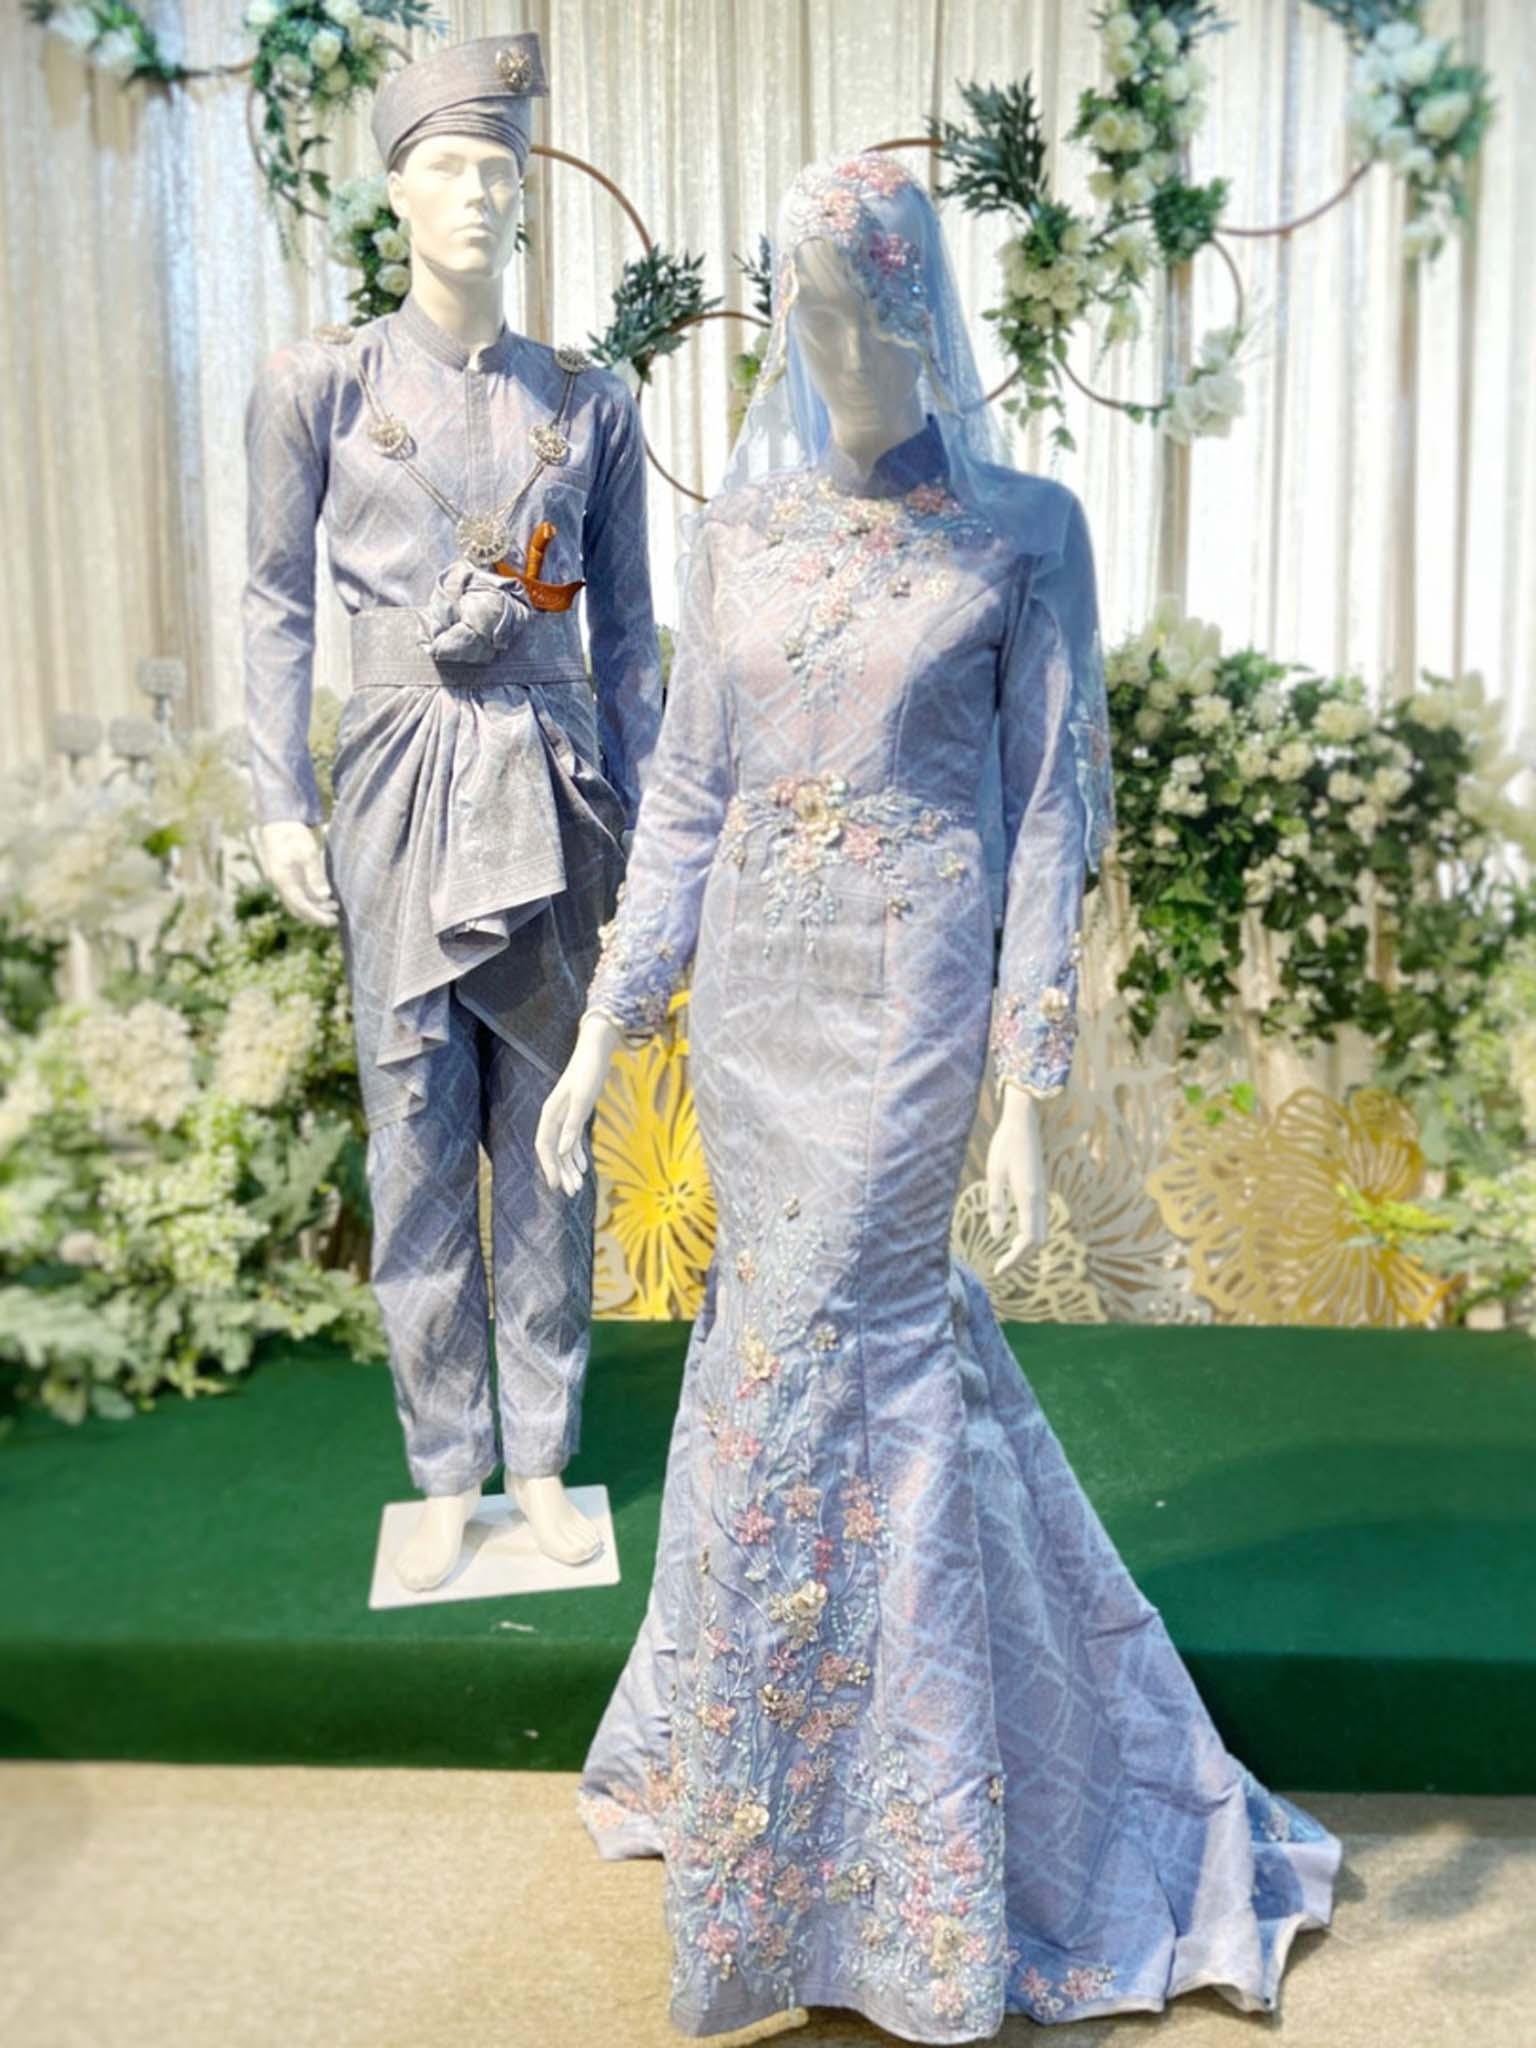 The UNICORN Baju Pengantin Songket Dusty Blue Trumpet Dress with Silver Lace is made from high-quality Songket fabric and features a beautiful trumpet silhouette.